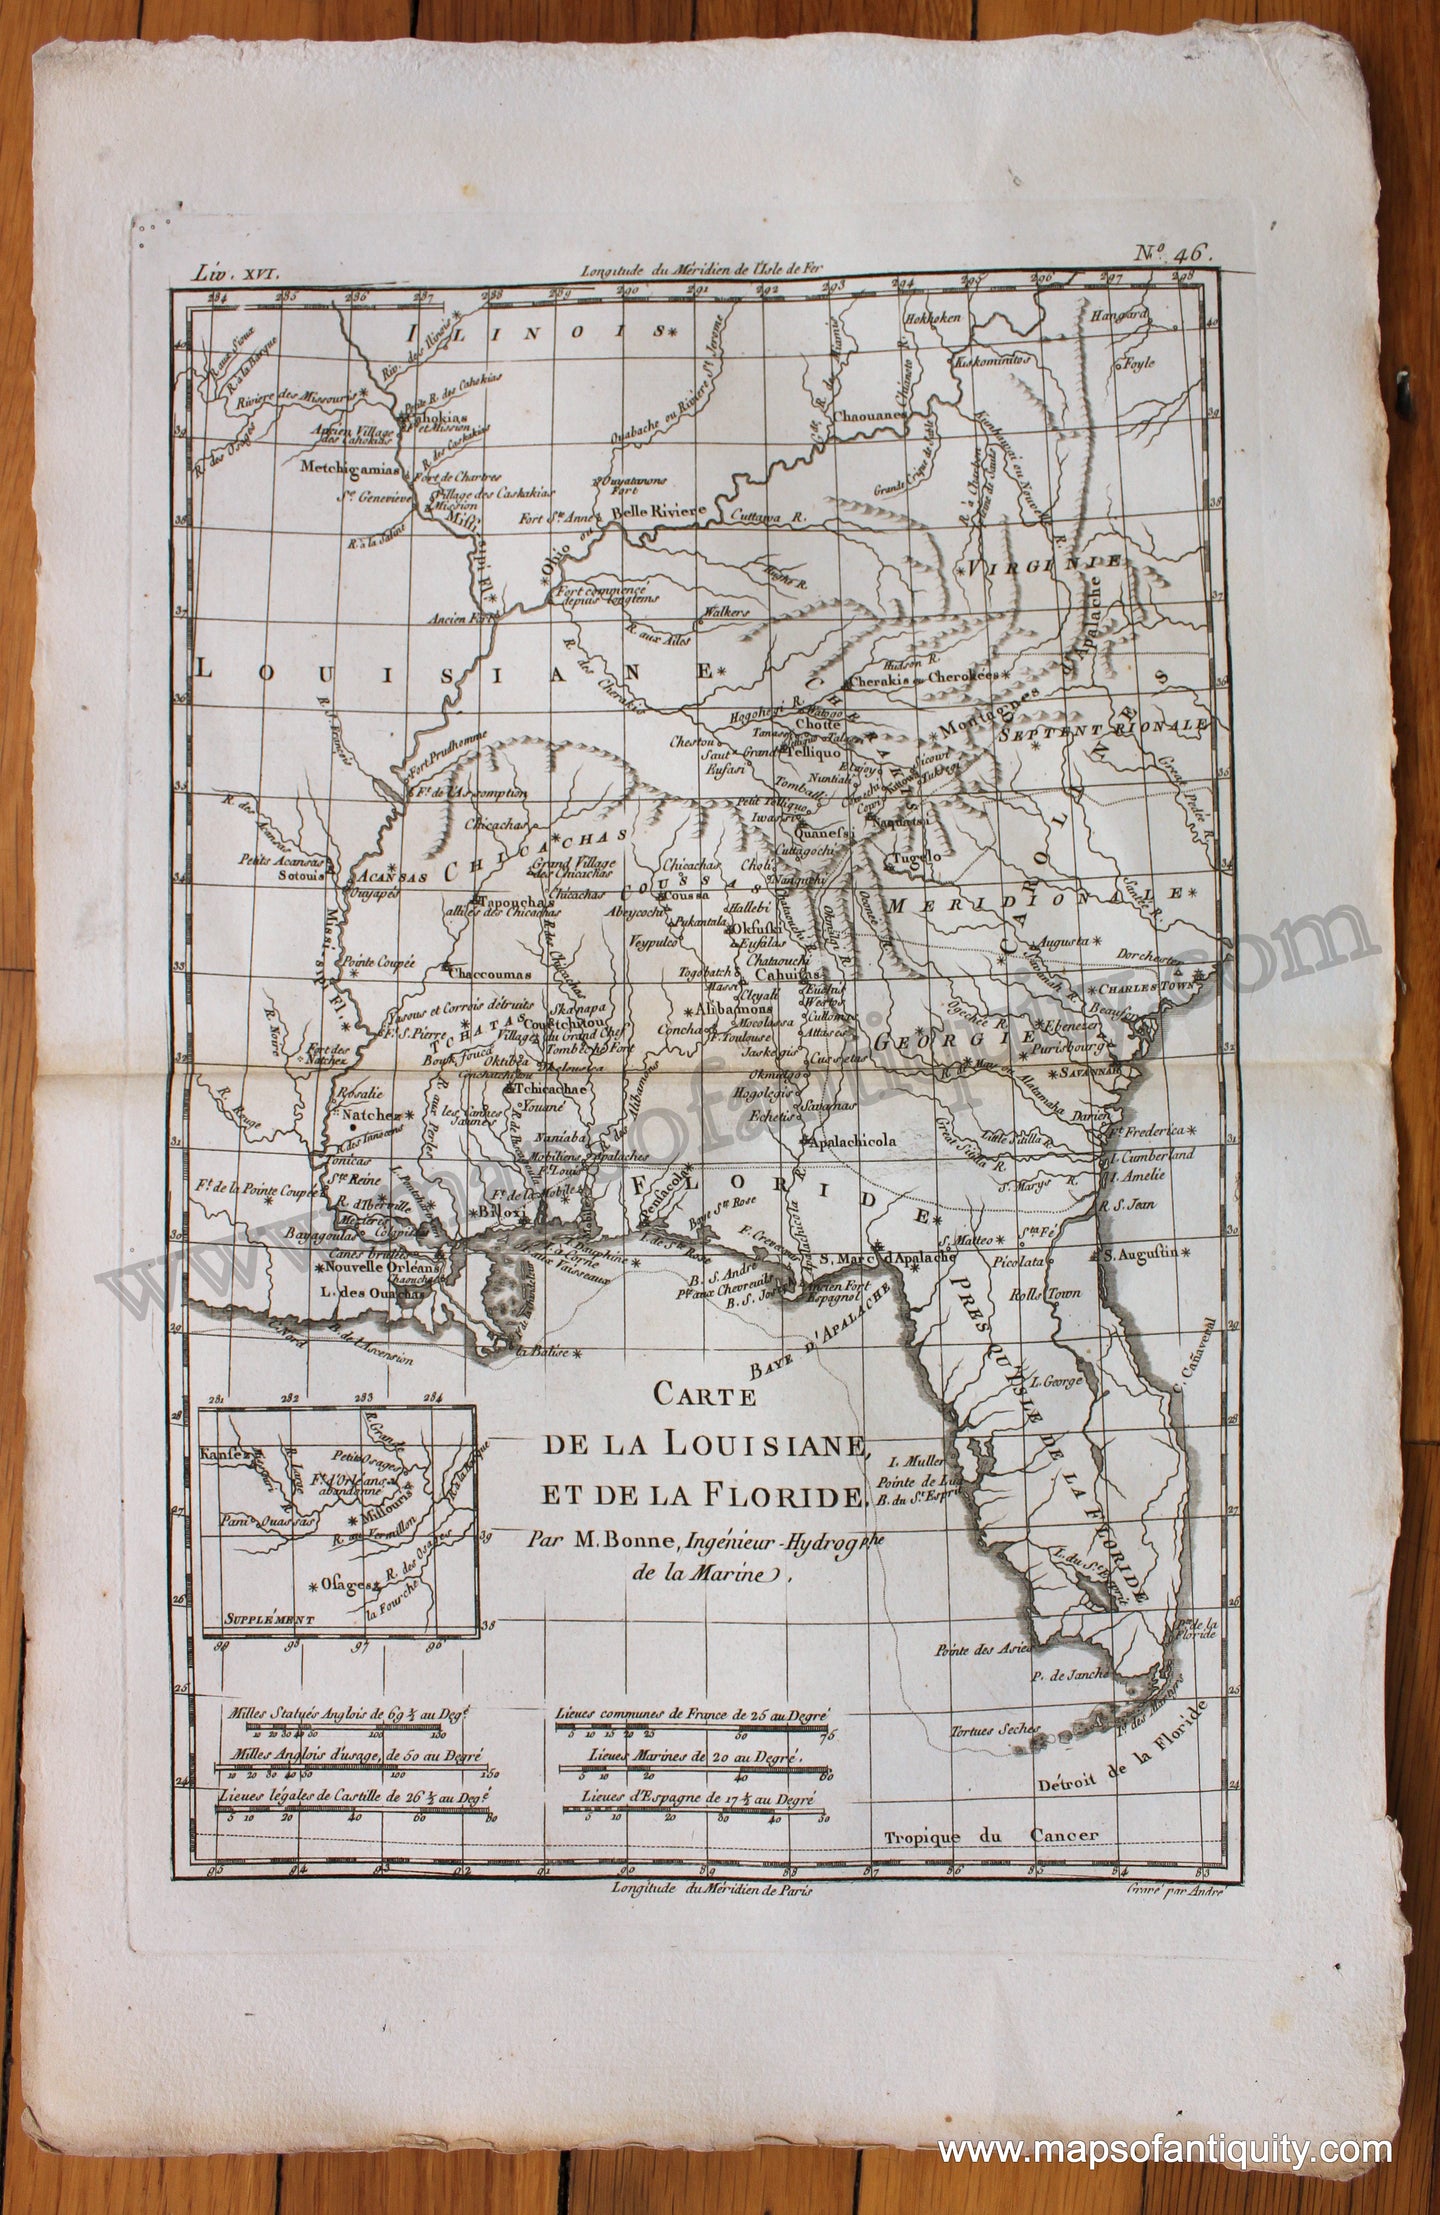 Antique-Early-Map-La-Louysiane-et-la-Floride-Louisiana-and-Florida-Raynal-and-Bonne-1780-1780s-1700s-Late-18th-Century-Maps-of-Antiquity